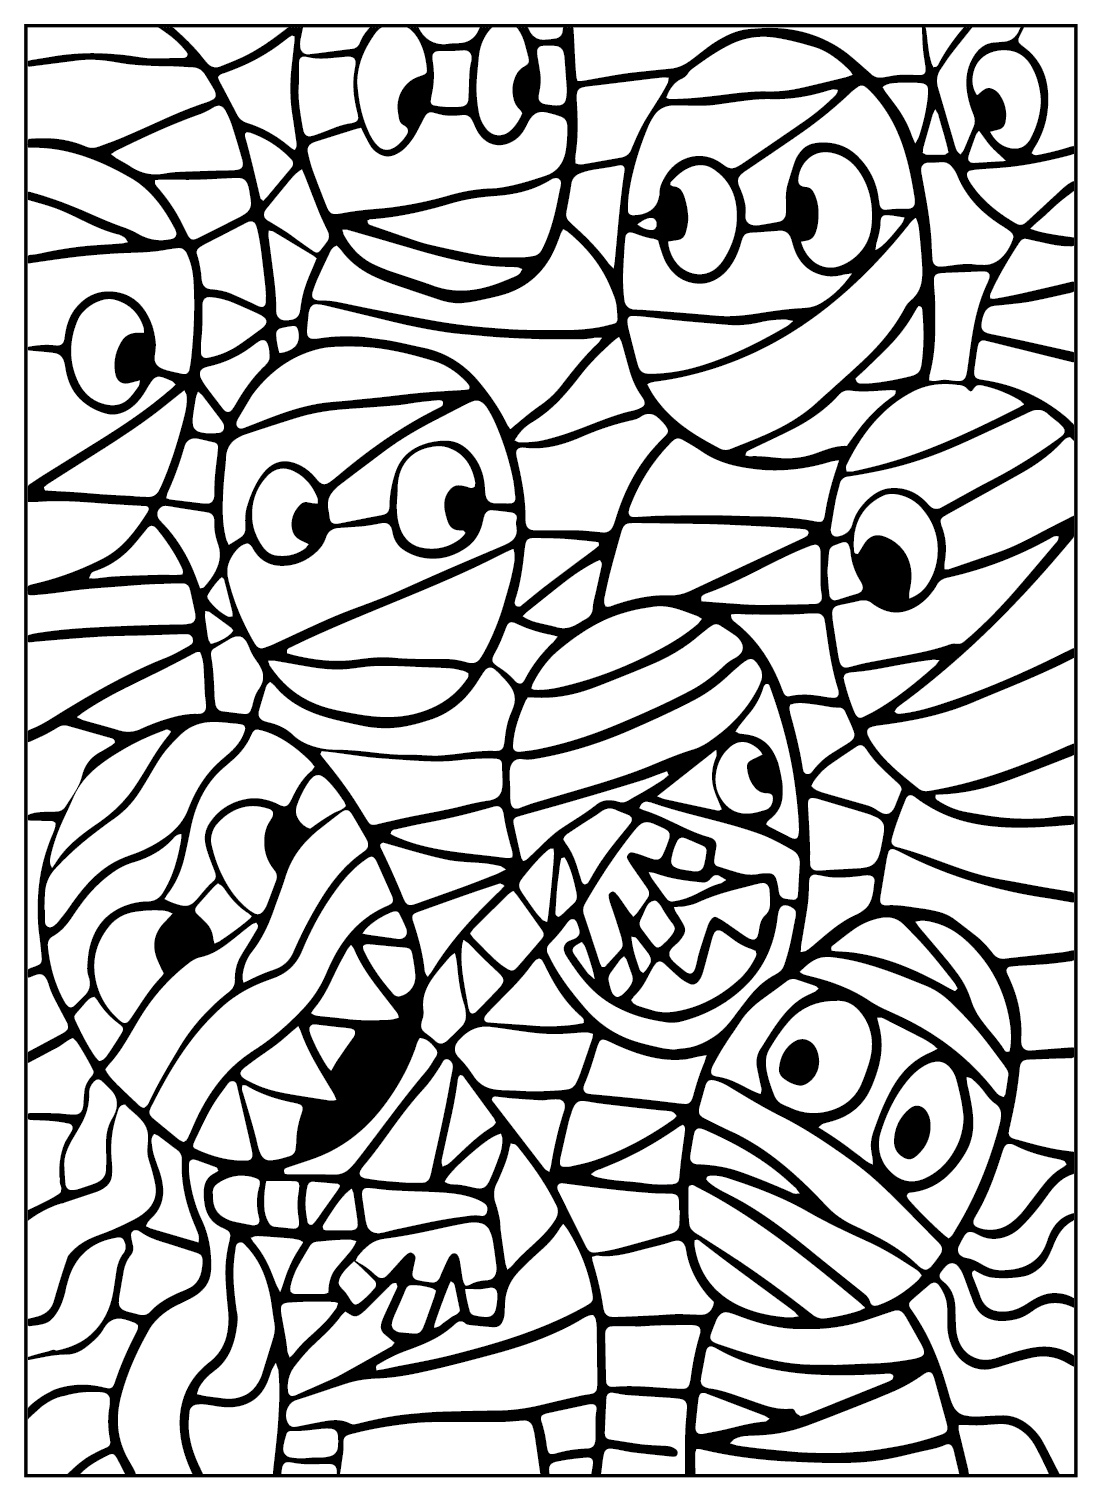 Mummy Coloring Sheet for Kids